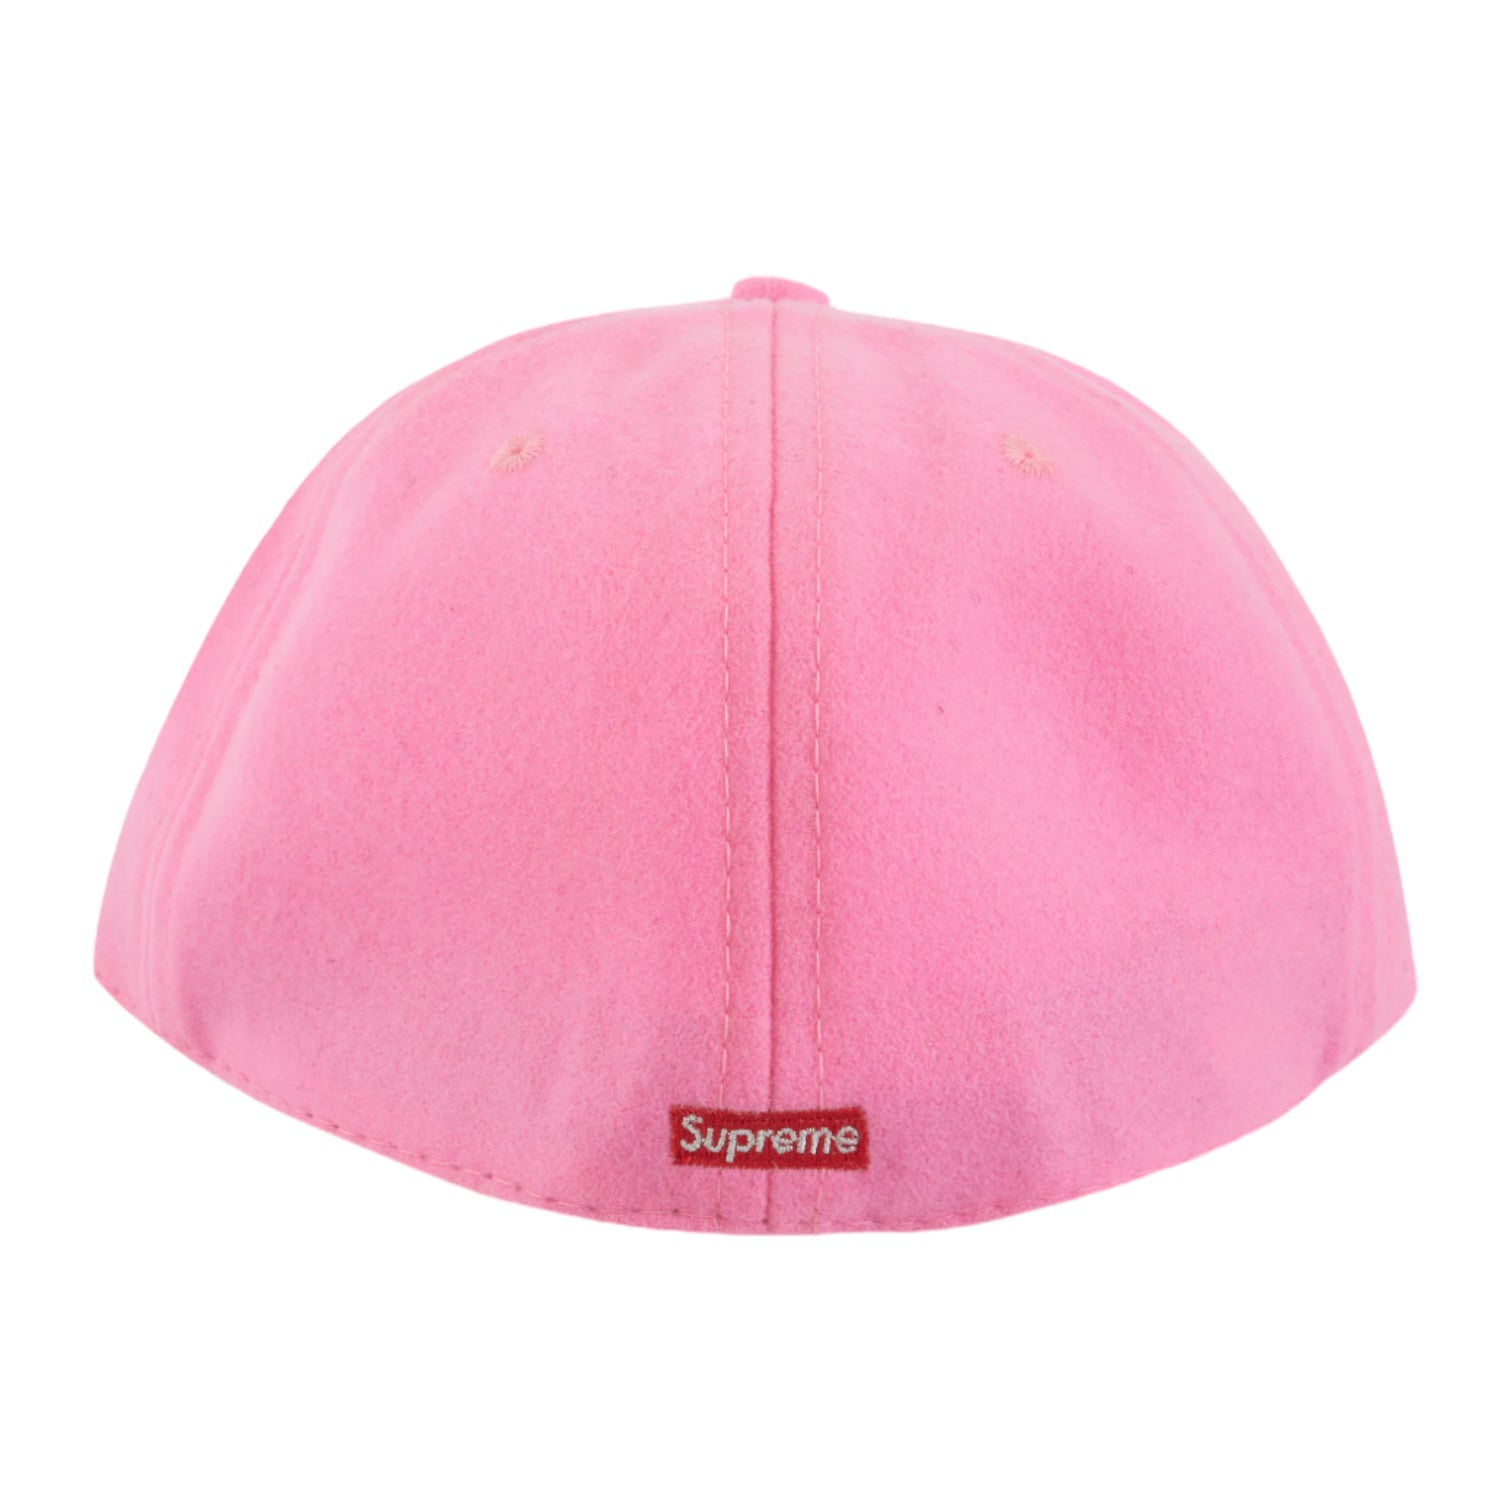 Supreme x Ebbets S Logo Fitted 6-Panel - Bright Pink